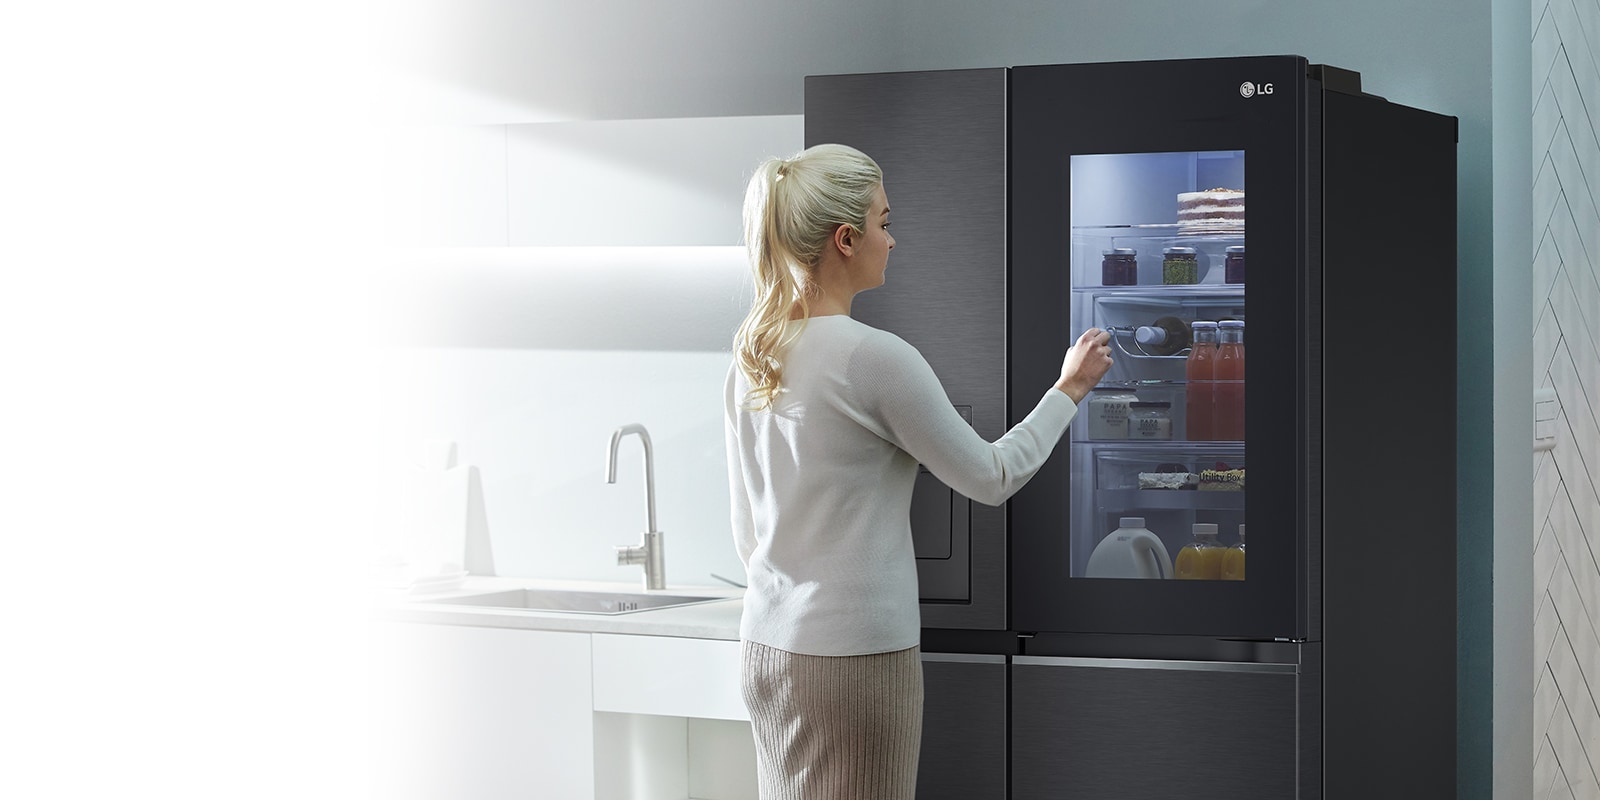 An image shows a woman at her InstaView refrigerator with knocking motion. The interior lights up and she can see the contents of her fridge without opening the door. 